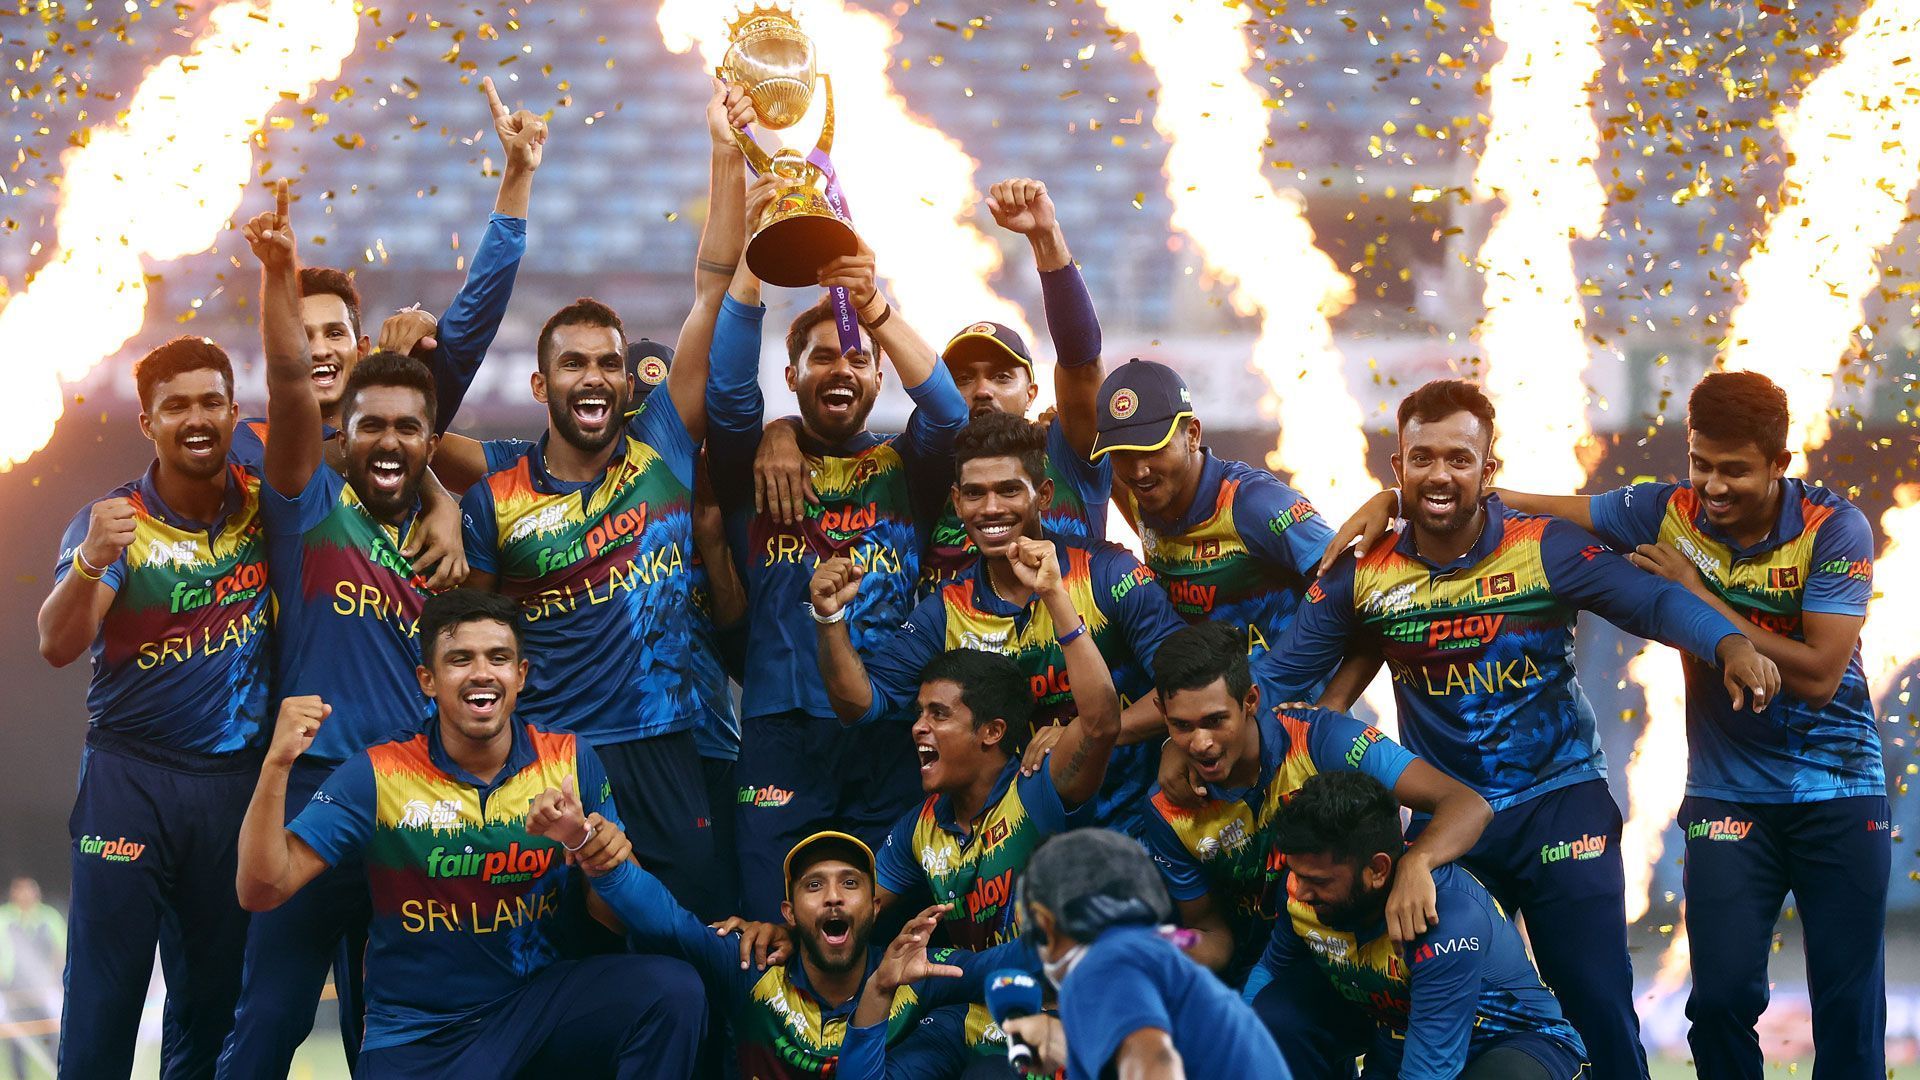 Sri Lanka won the recently held World Cup Qualifiers but the Asia Cup will pose a bigger challenge